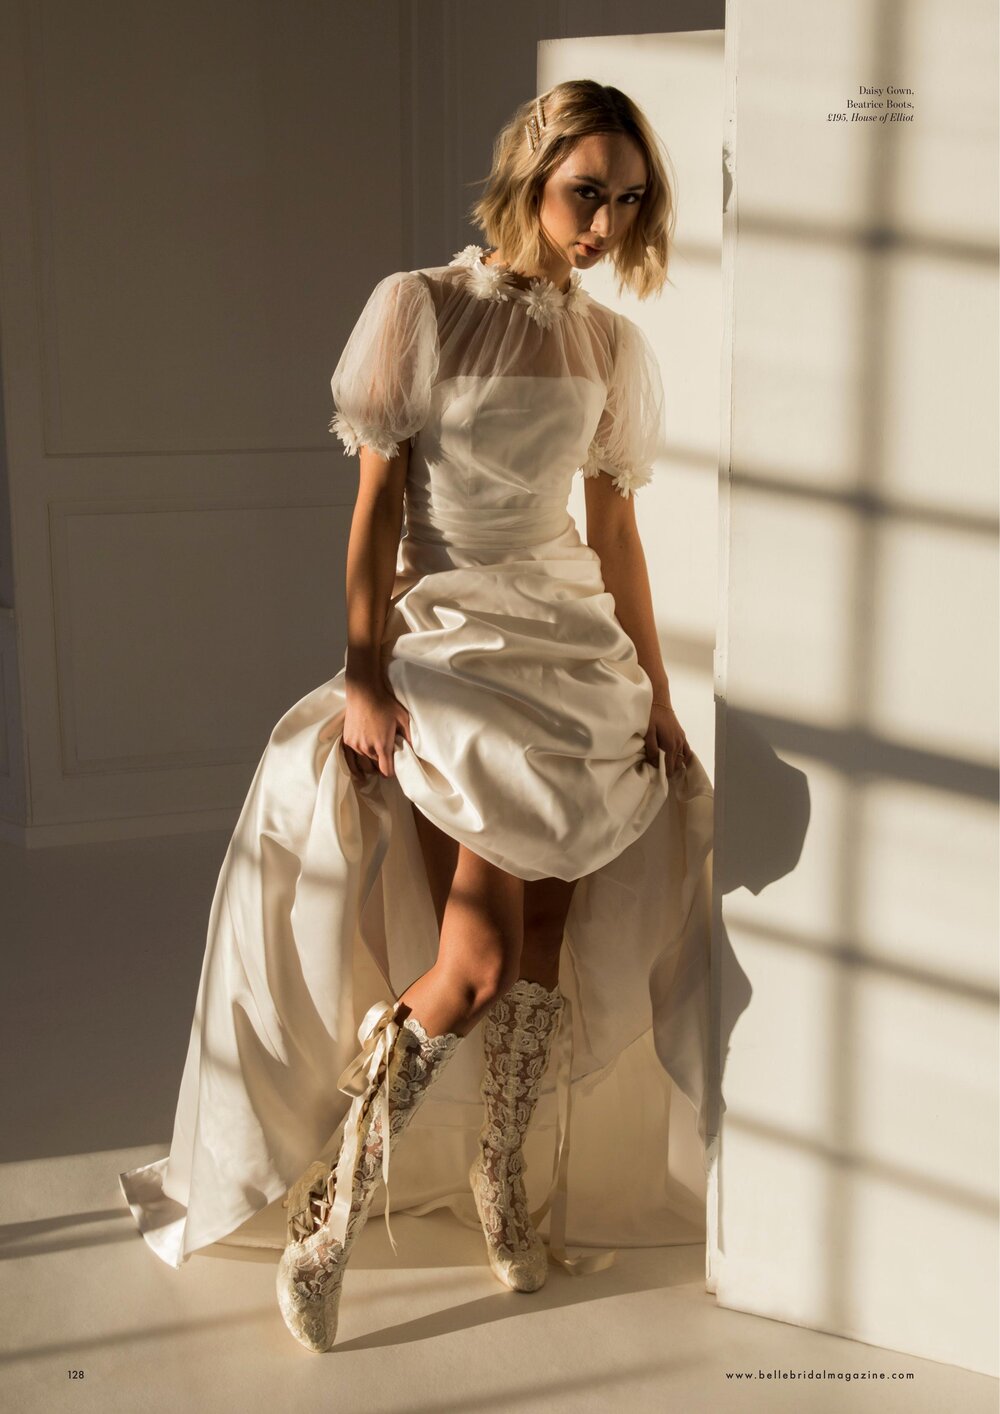 Belle Bridal Secret Tower - Long shot w clips and white boots.jpg